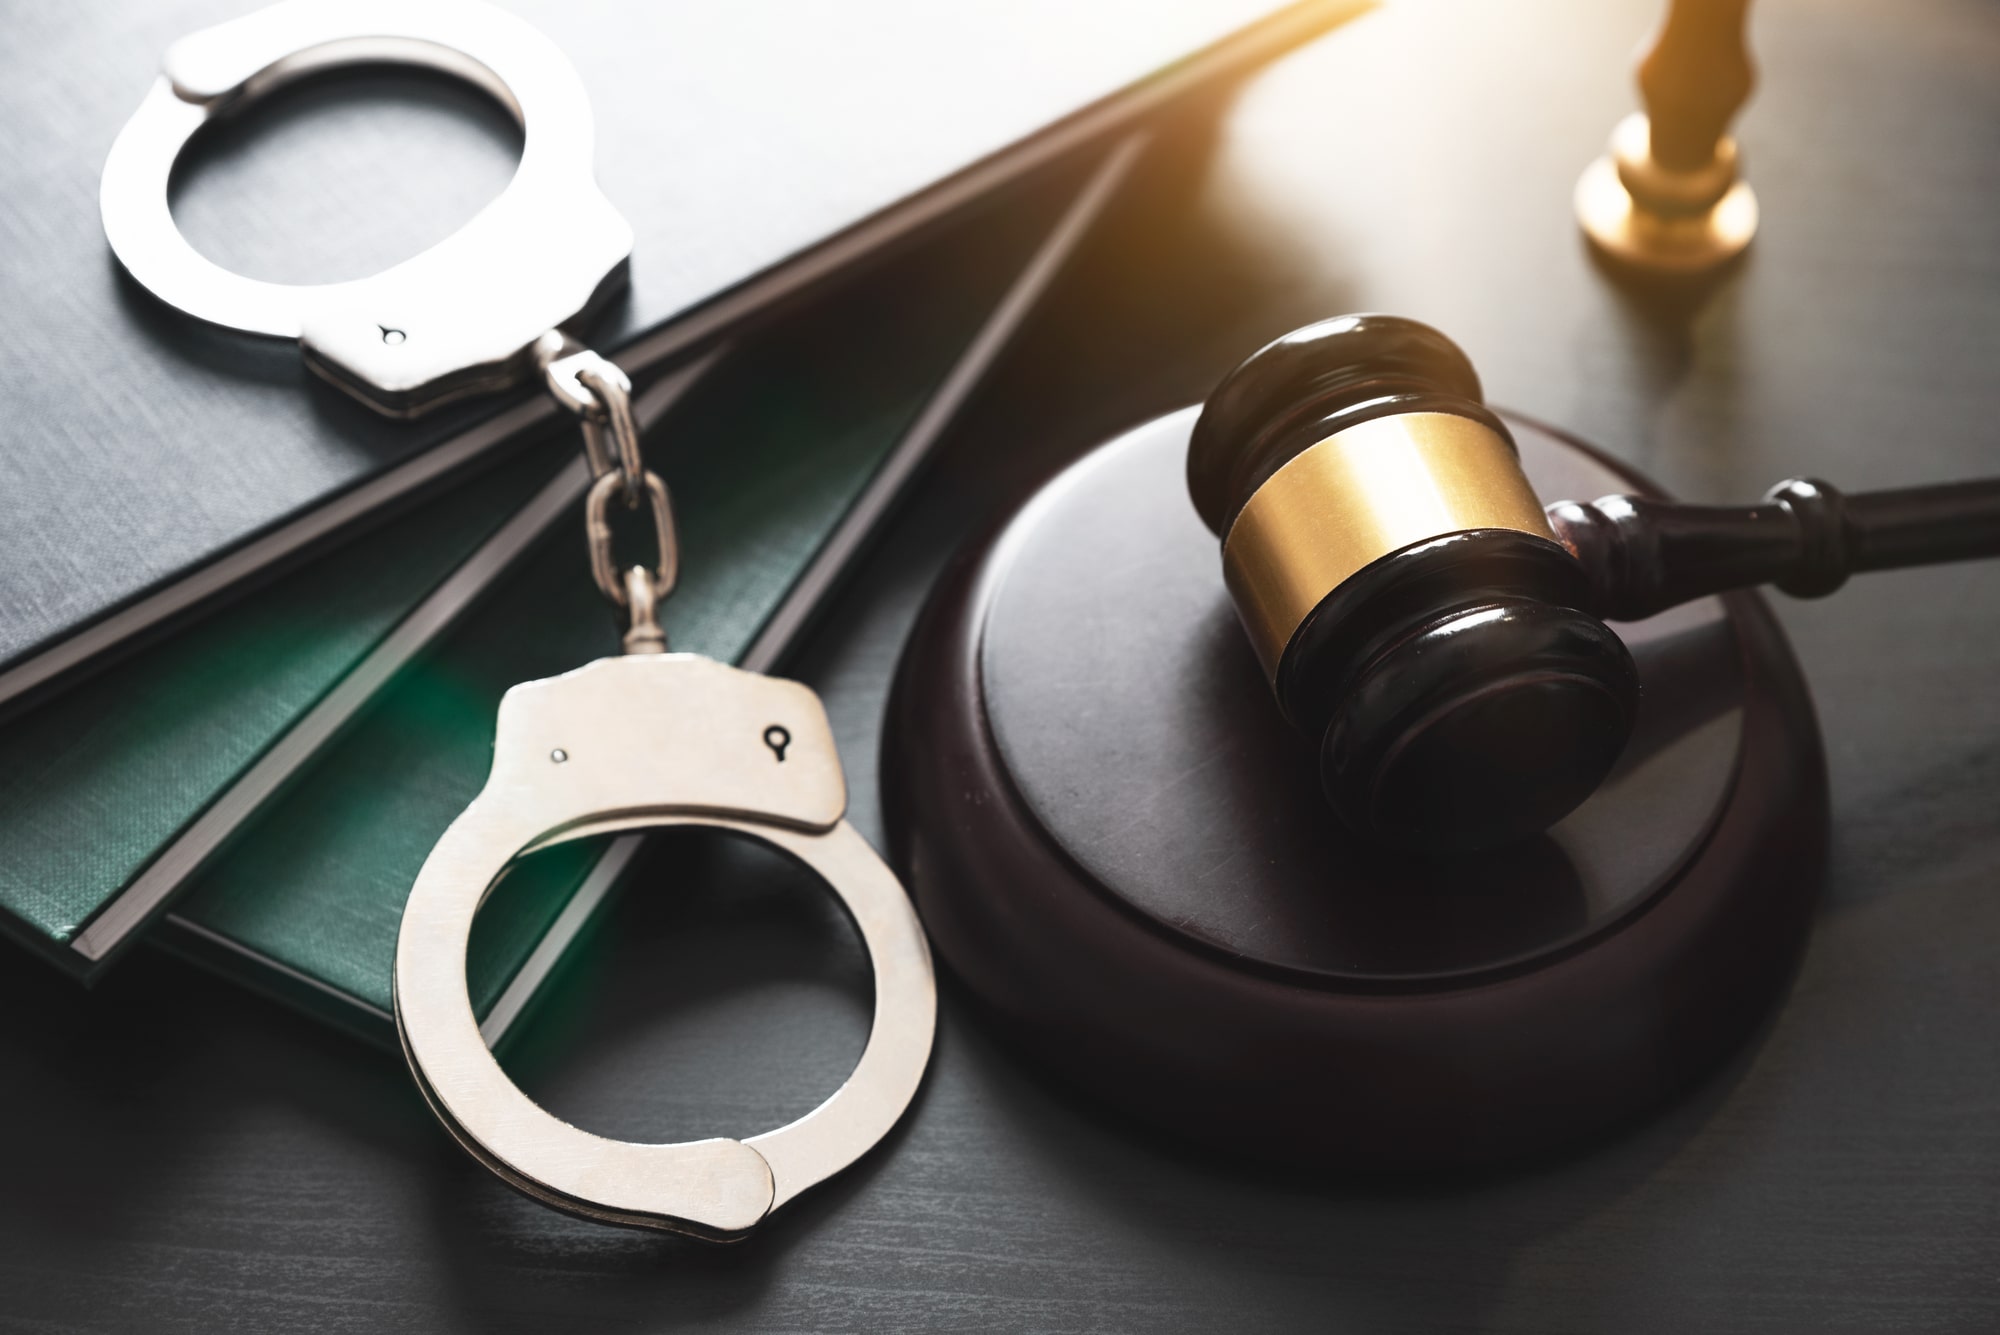 Frequently Asked Questions About Understanding The Basics Of Criminal Law